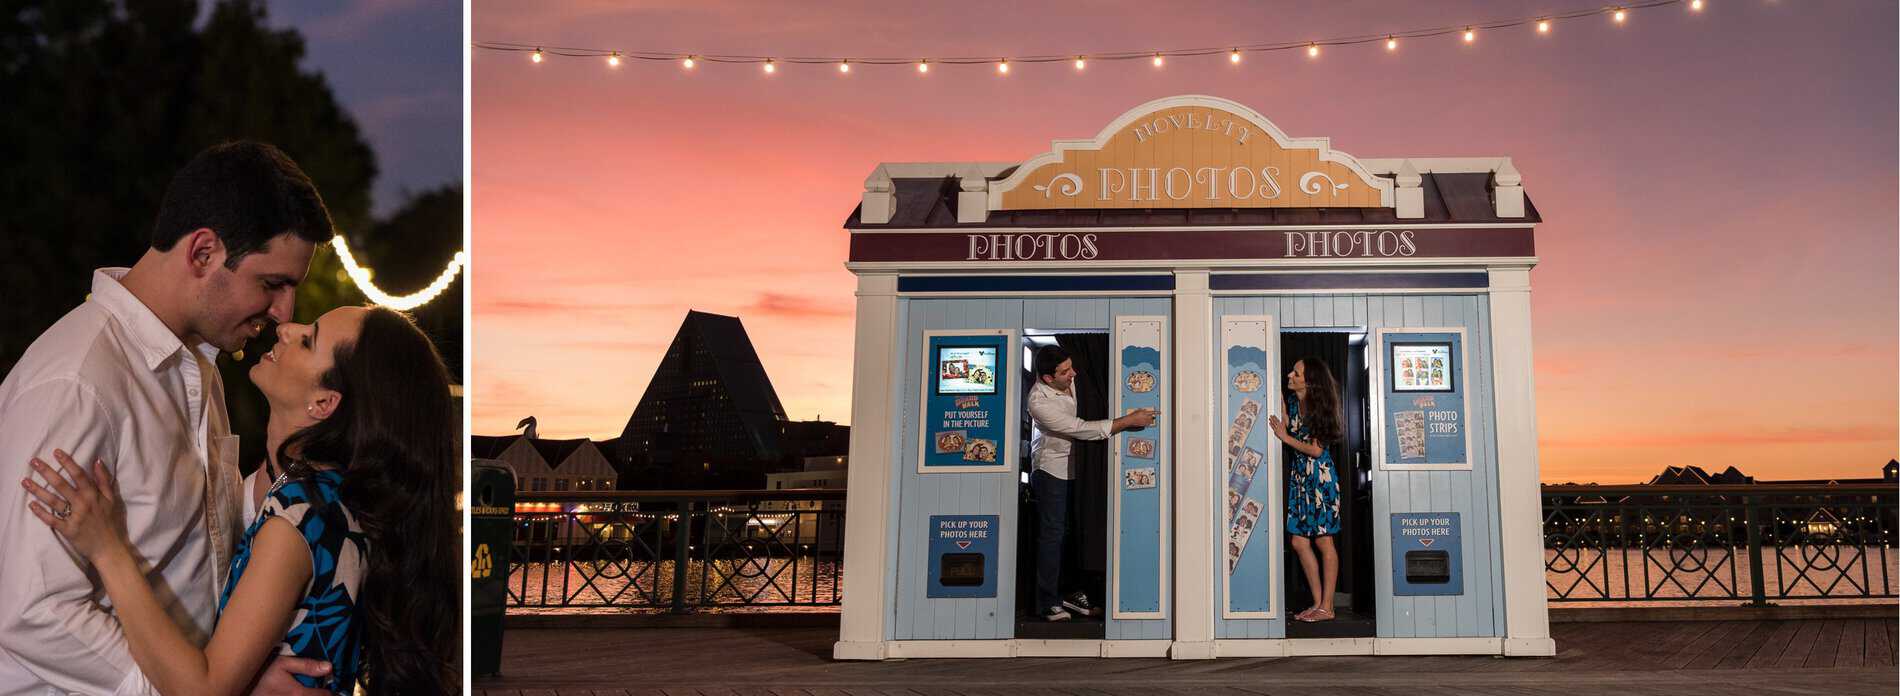 Couple at the Photo Booth during sunset at Disney Boardwalk